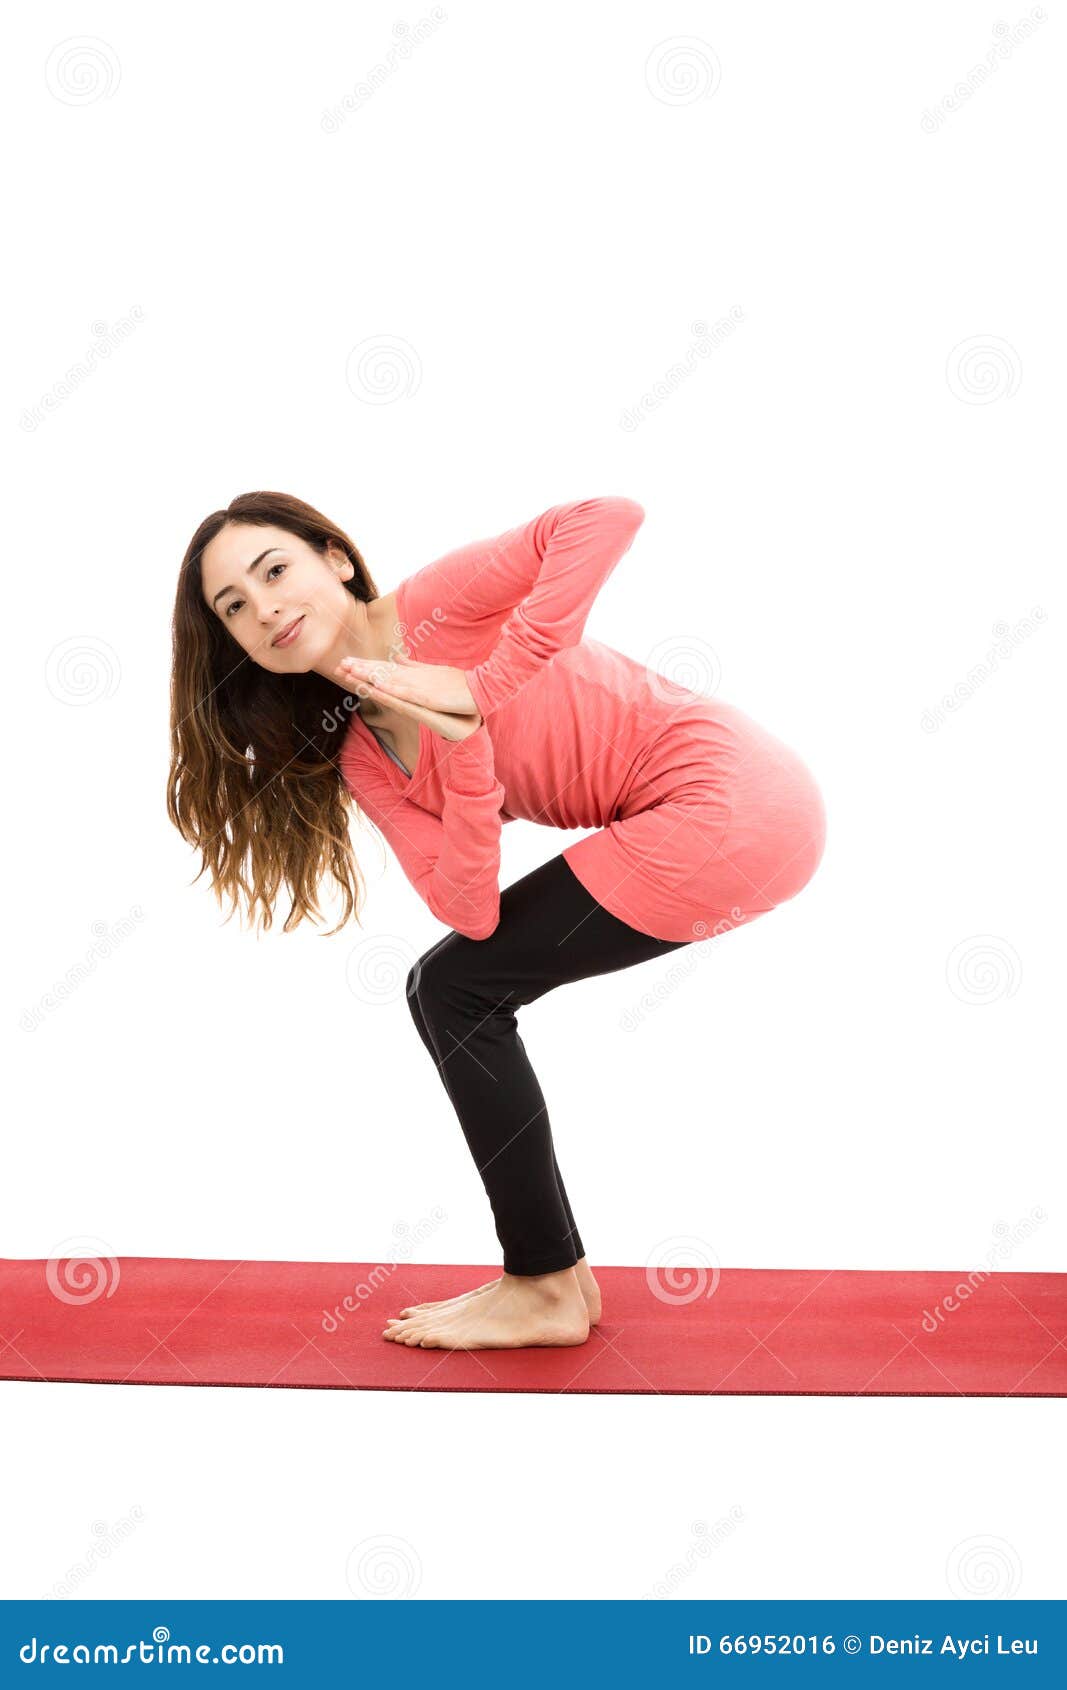 Tummee.com - It's Friday Flow Time!! Learn to teach Revolved Chair Pose  Revolved Side Angle Pose Flow at https://www.tummee.com/yoga-poses/revolved- chair-pose-revolved-side-angle-pose-flow Level: Intermediate Position:  Standing Type: Twist, Forward ...